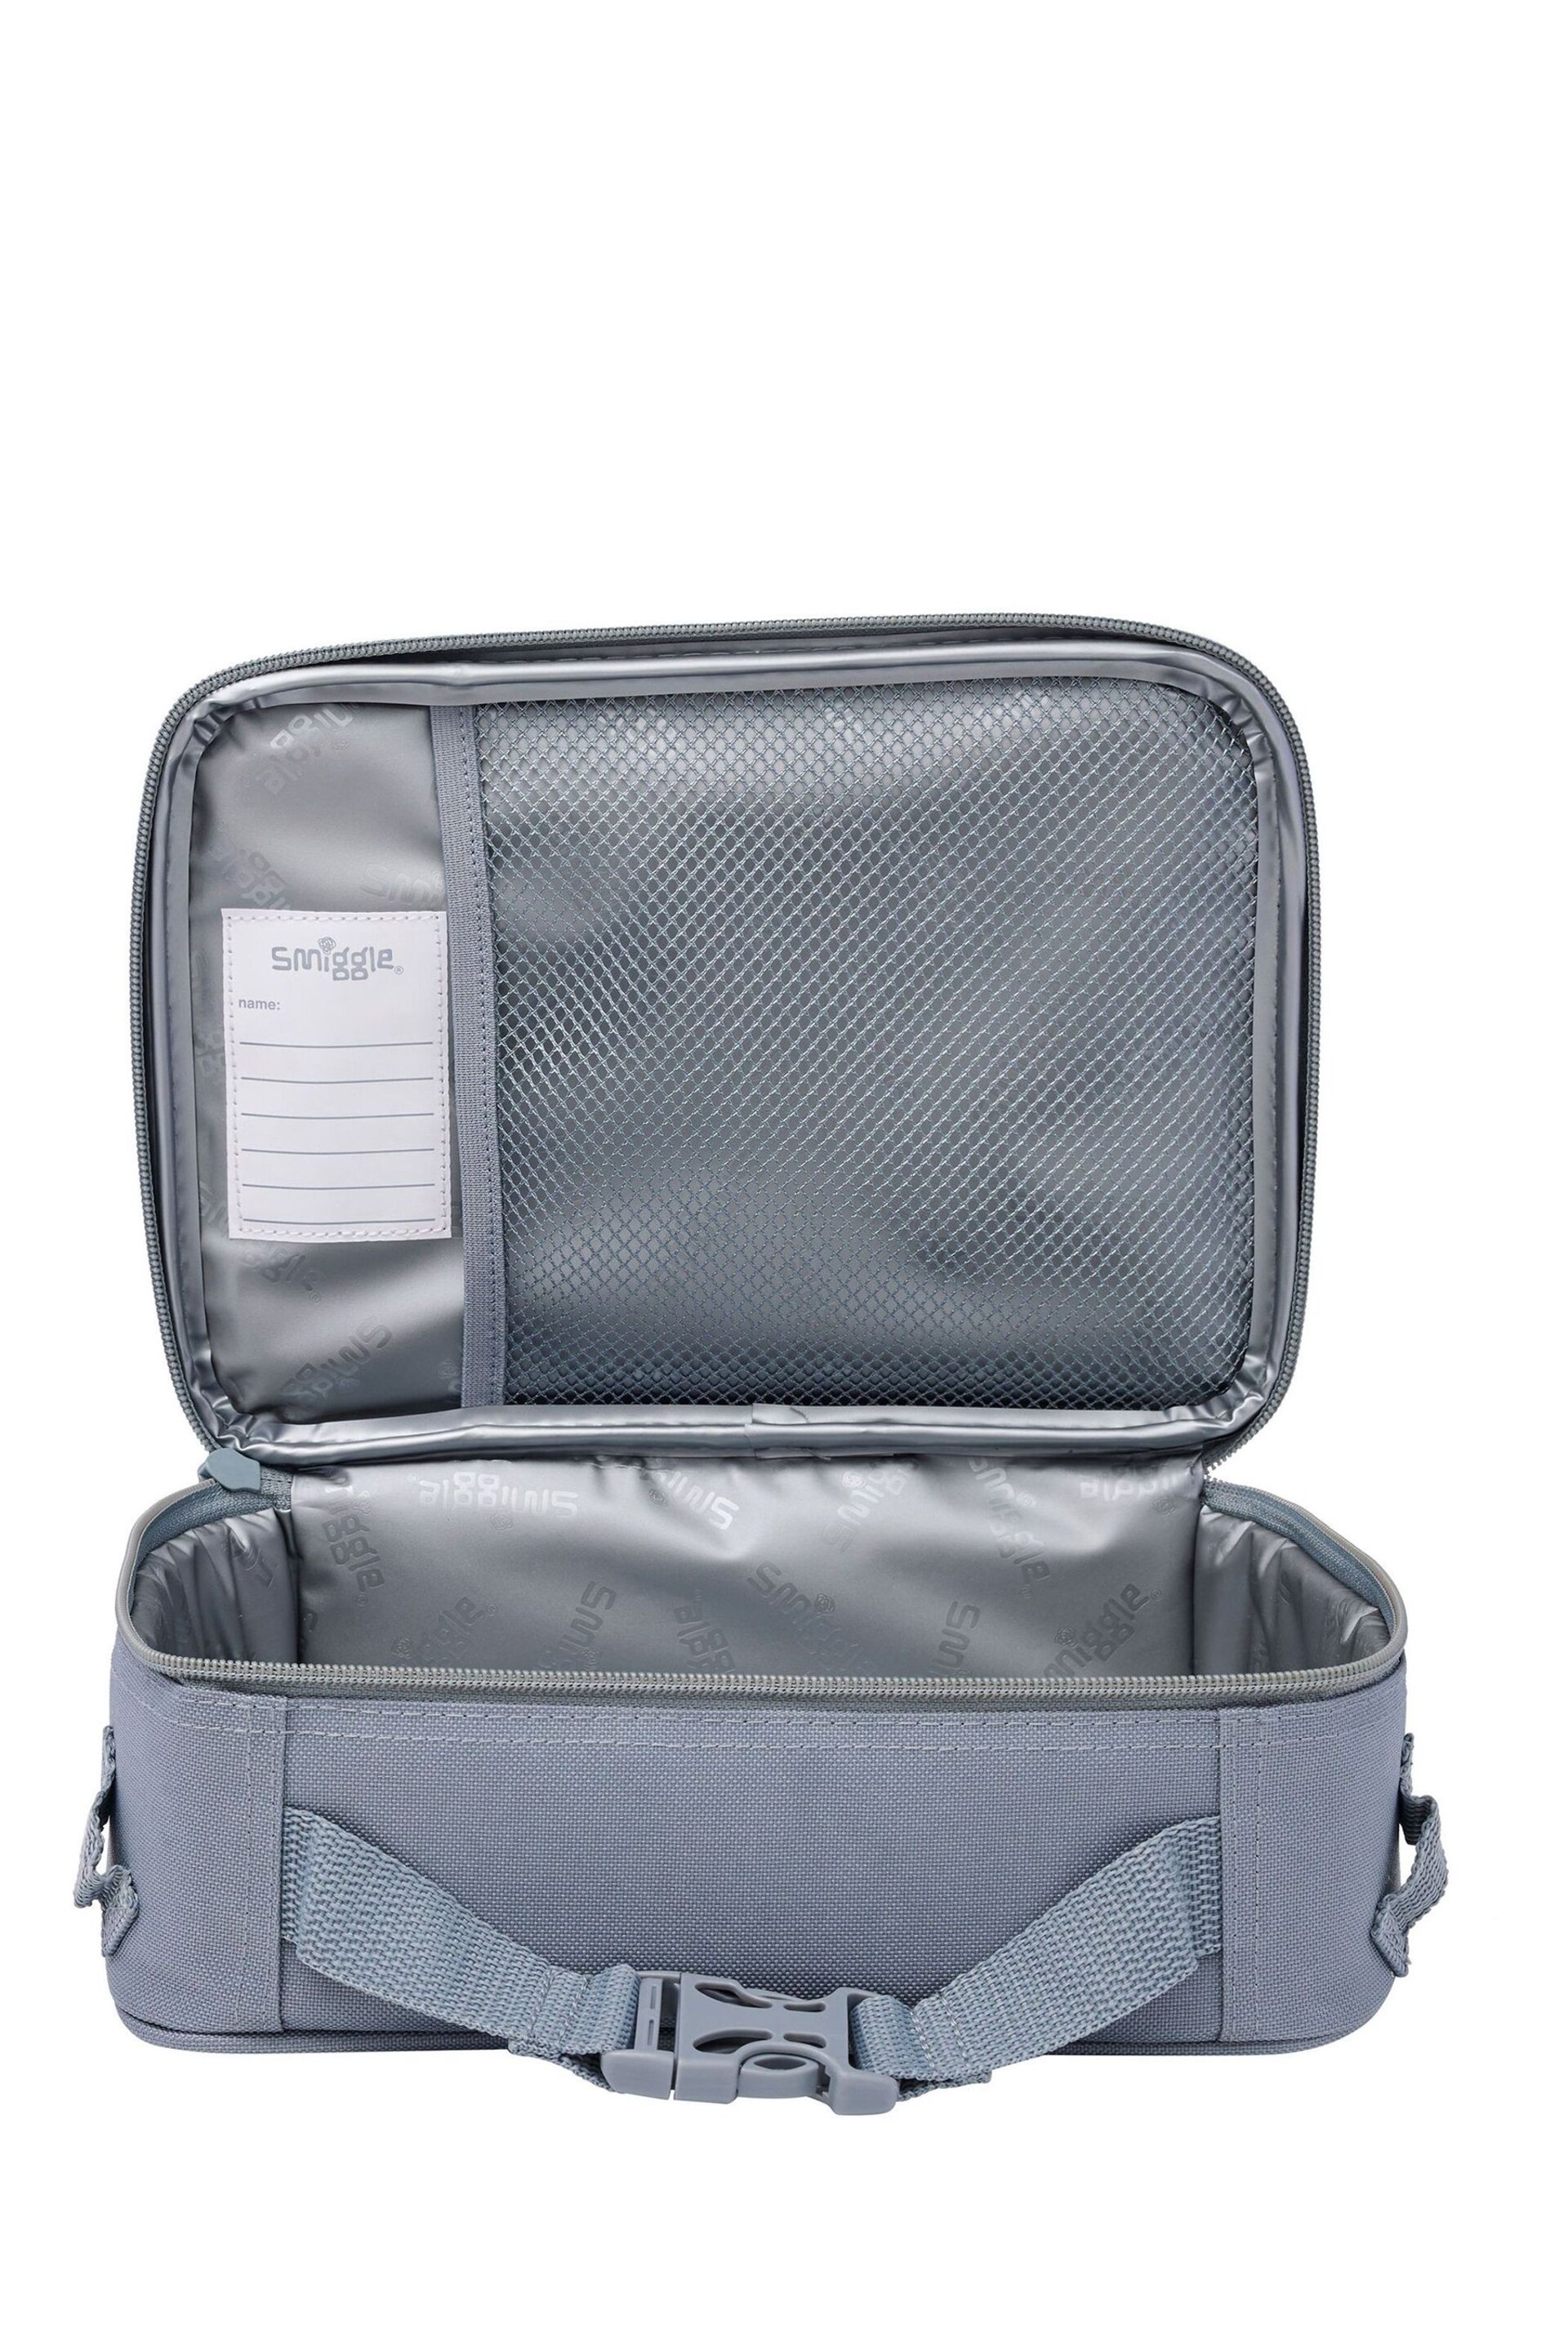 Smiggle Grey Wild Side Square Attach Id Lunch Box - Image 2 of 2